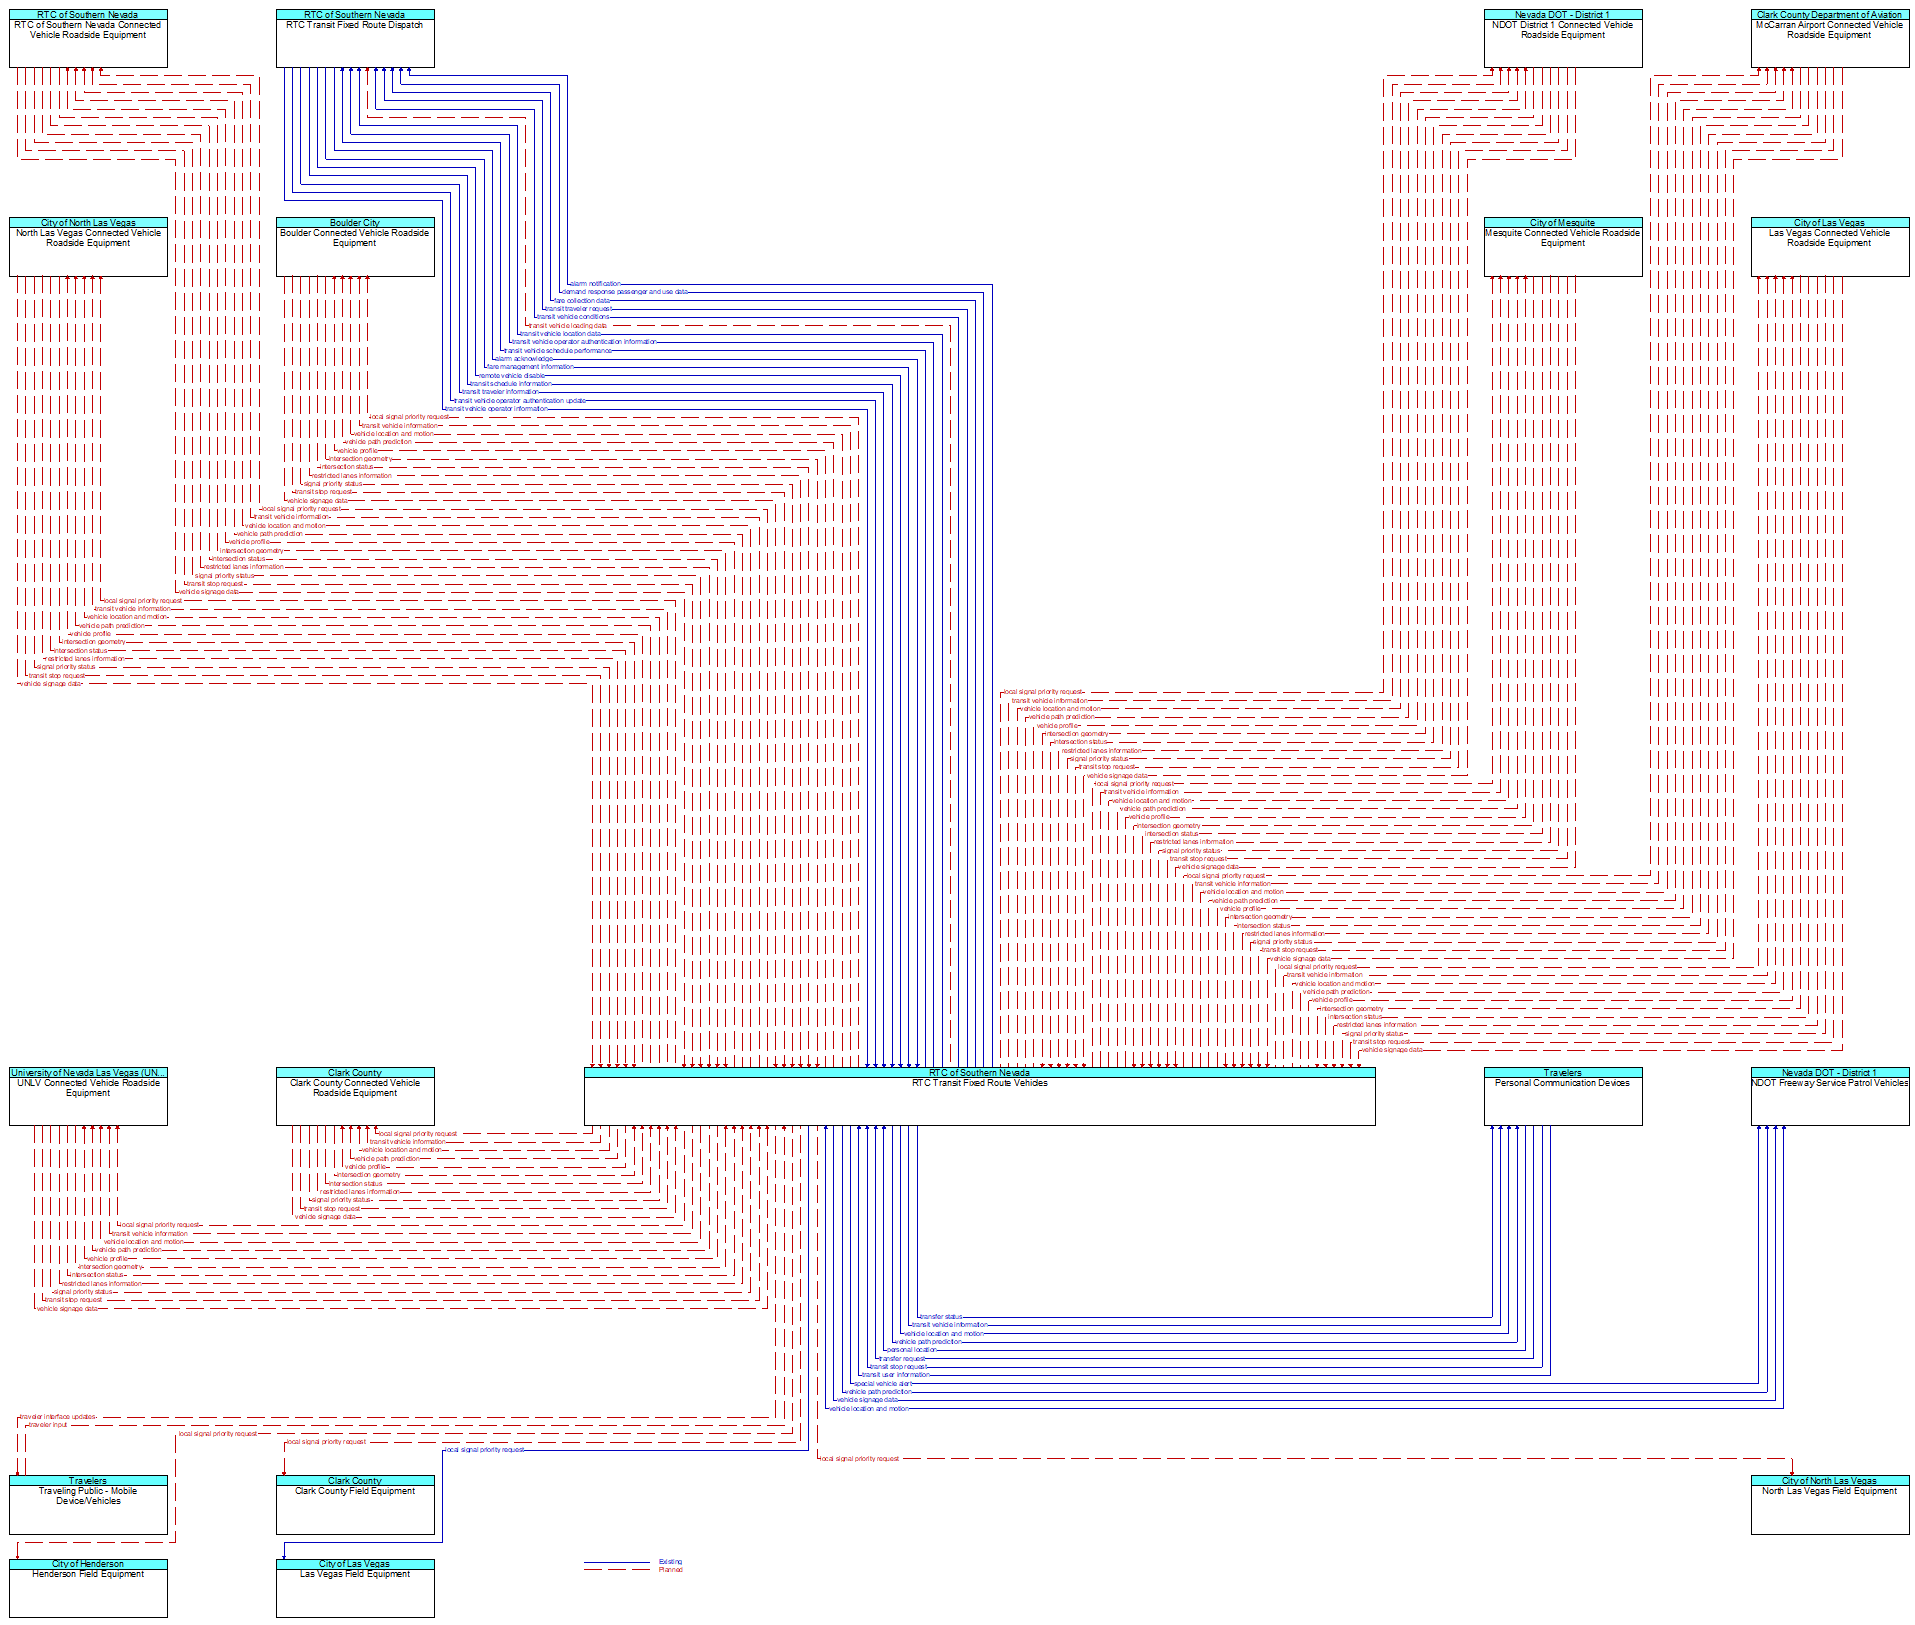 Context Diagram - RTC Transit Fixed Route Vehicles